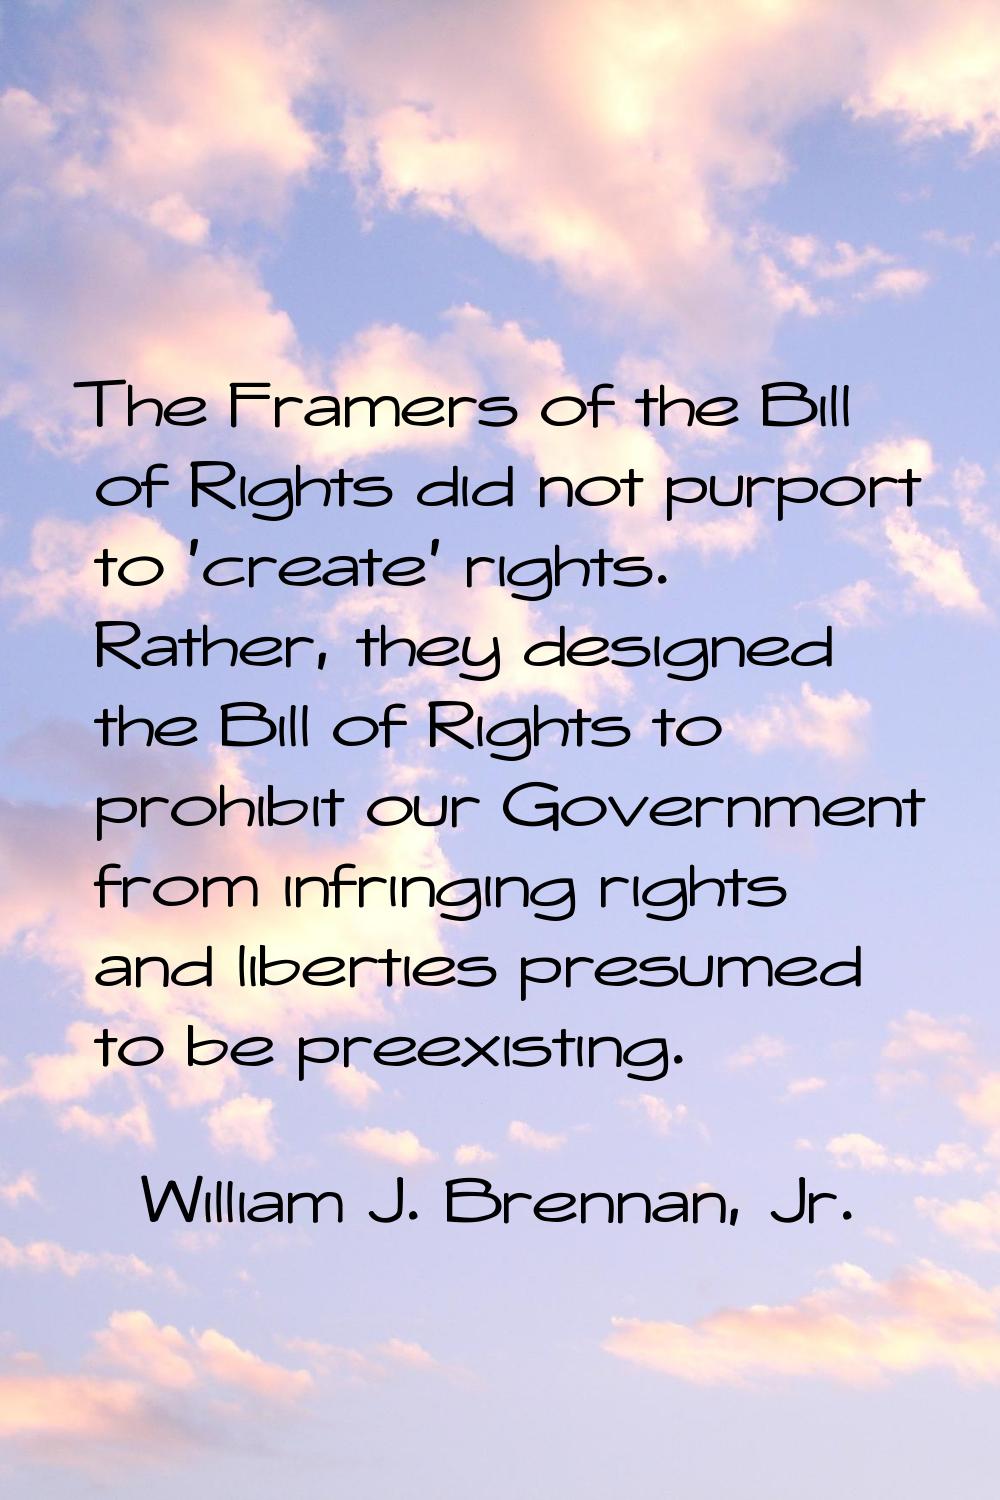 The Framers of the Bill of Rights did not purport to 'create' rights. Rather, they designed the Bil